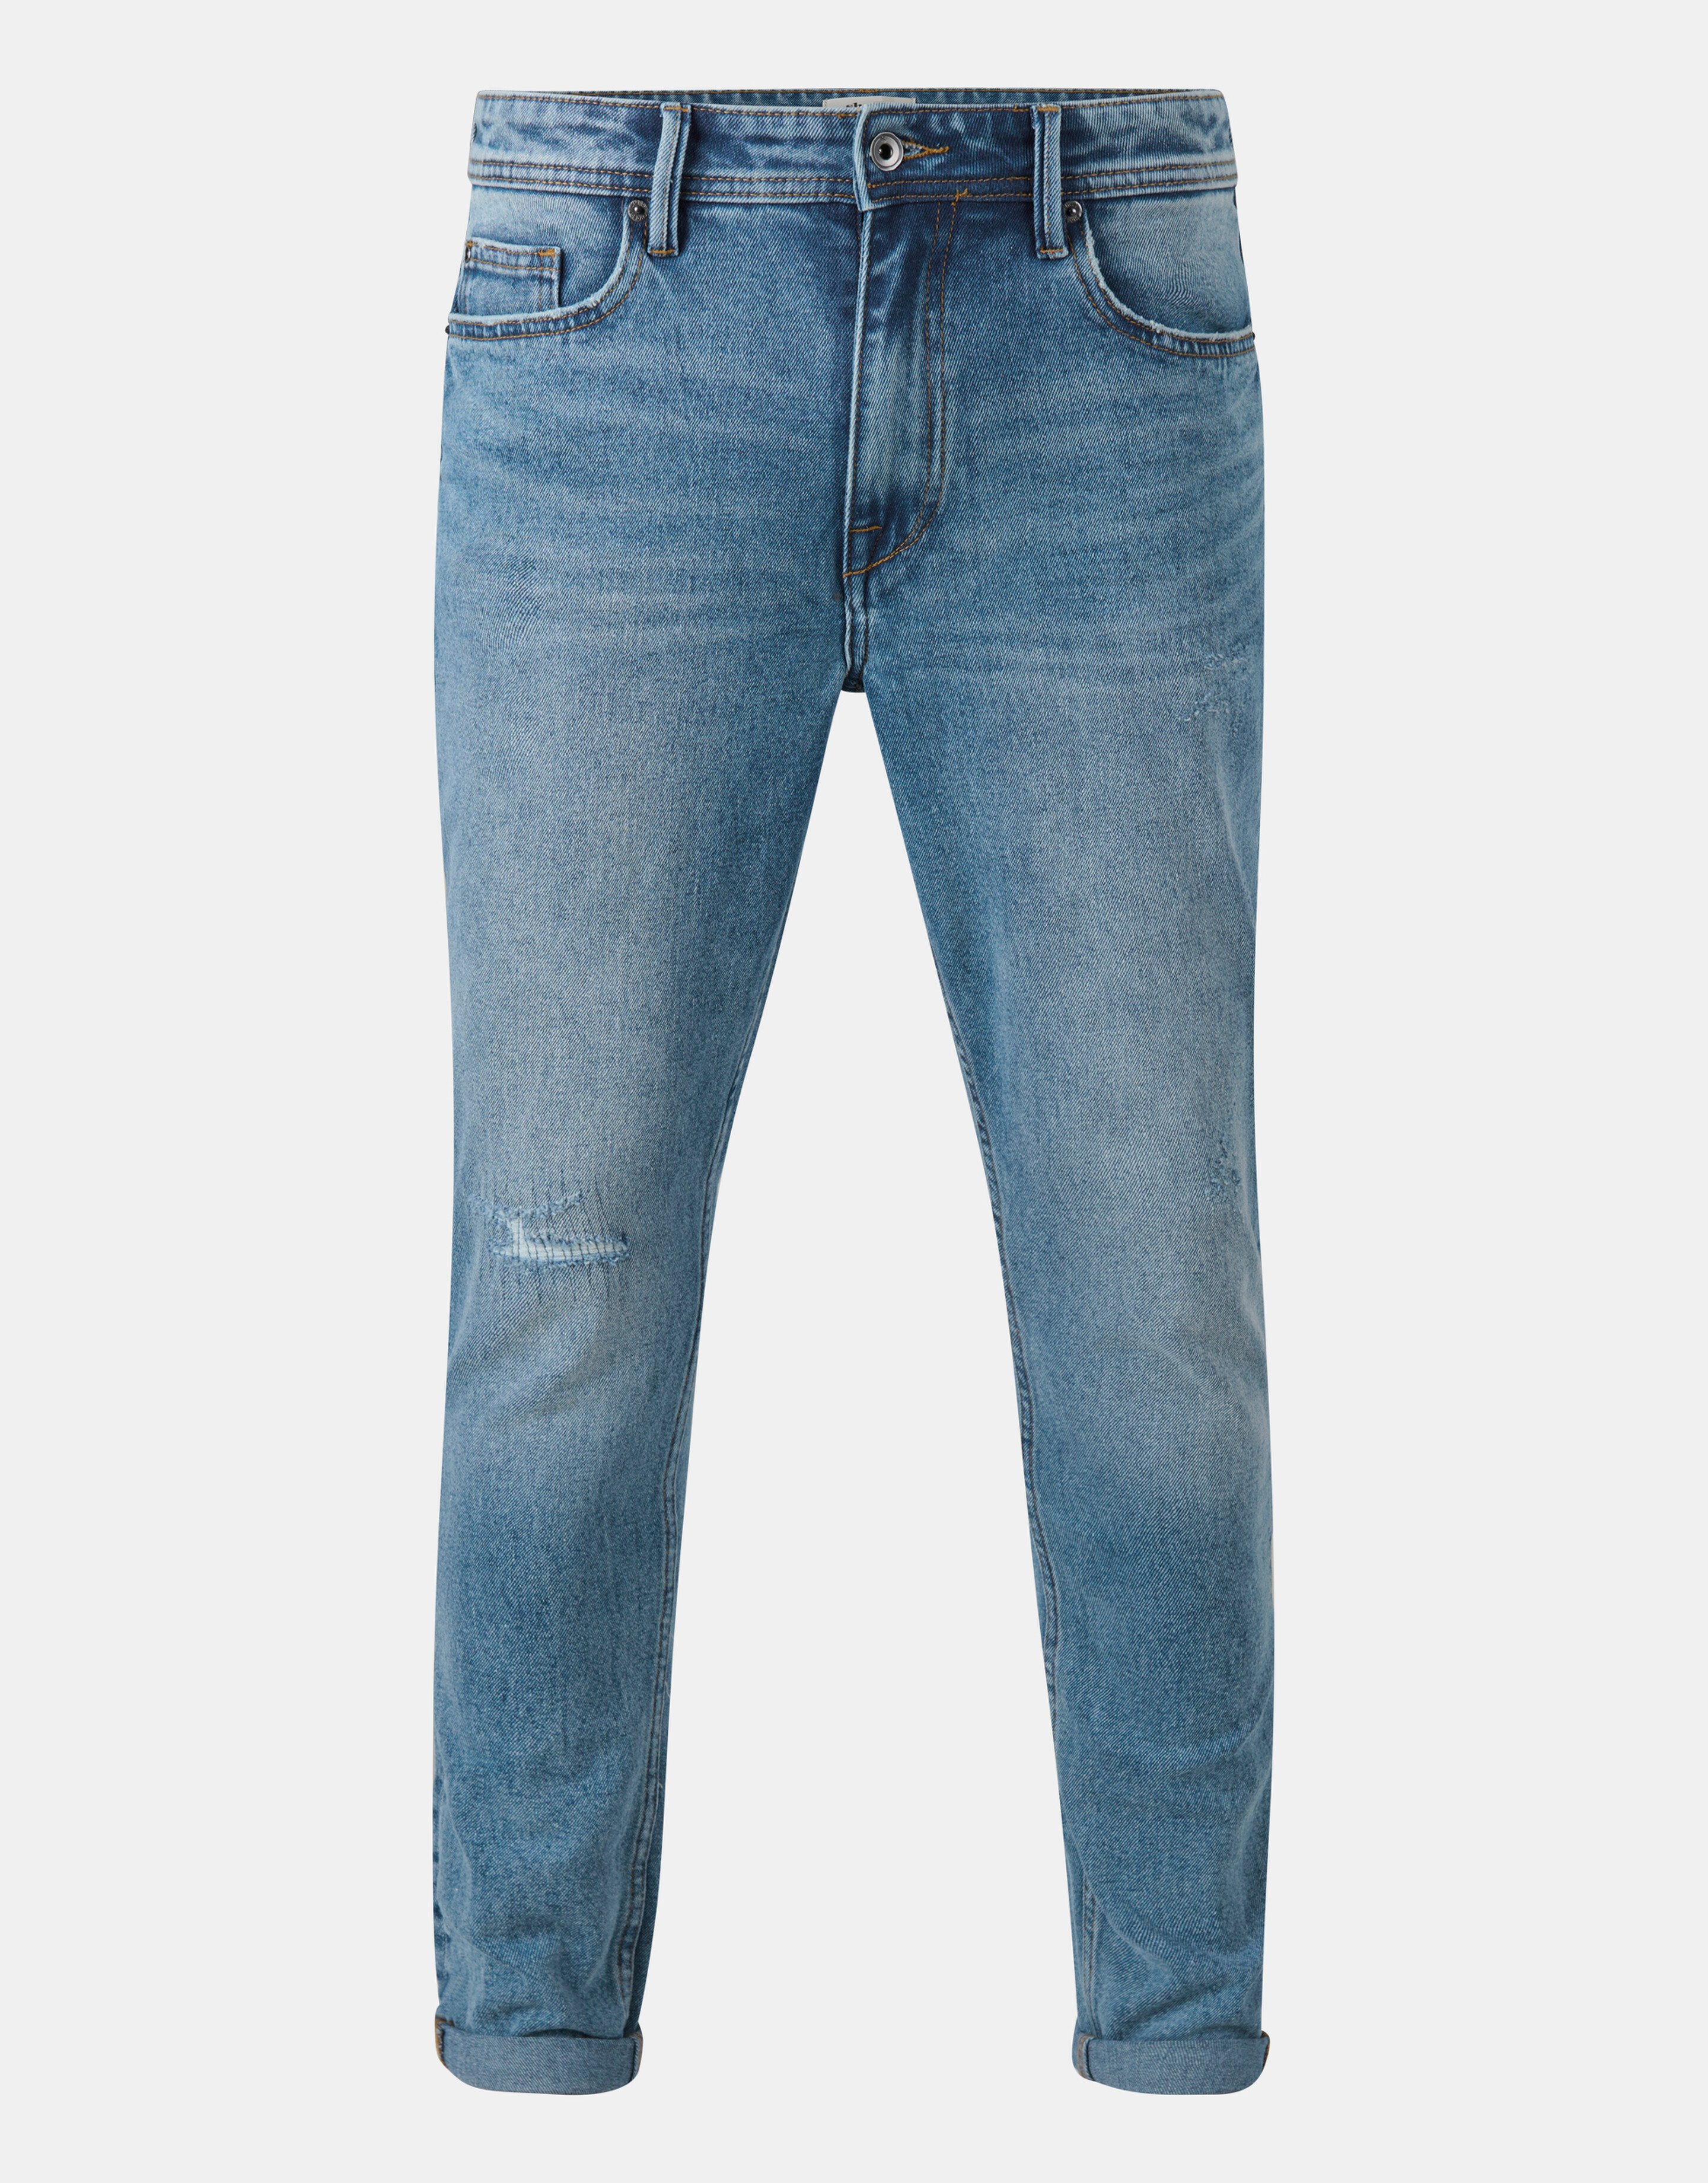 Repaired Mediumstone Tapered Jeans L32 SHOEBY MEN